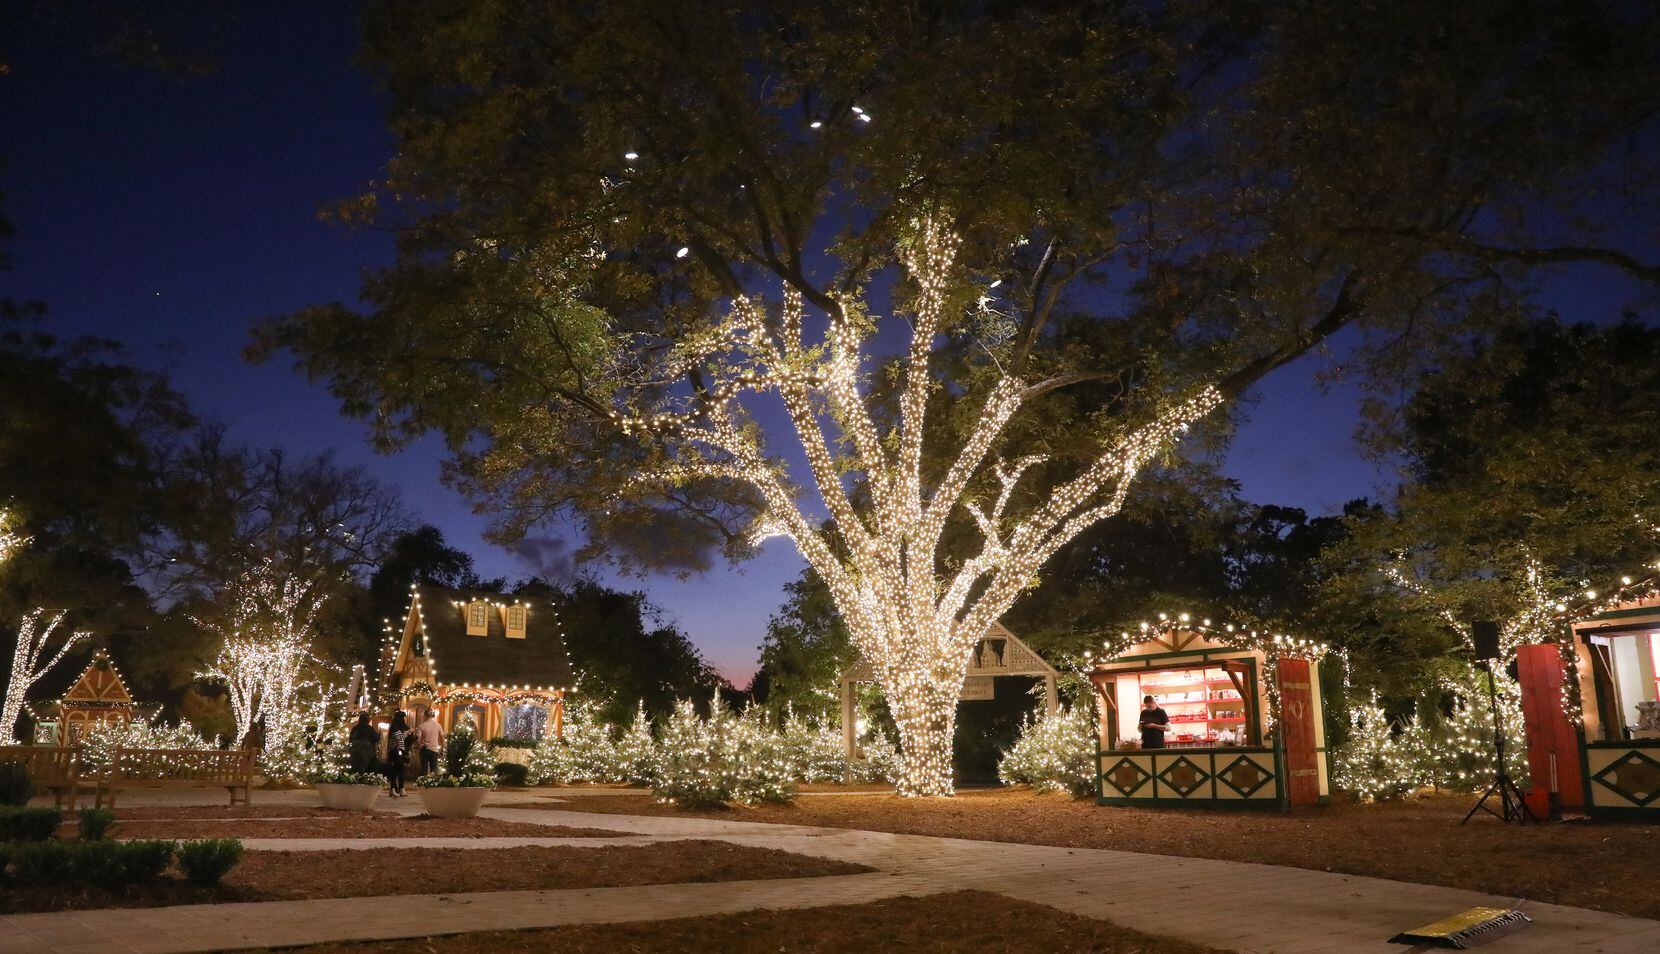 The lights at the Christmas Village turned on for the first night of the Dallas Arboretum's Holiday at the Arboretum celebration on Nov. 9.